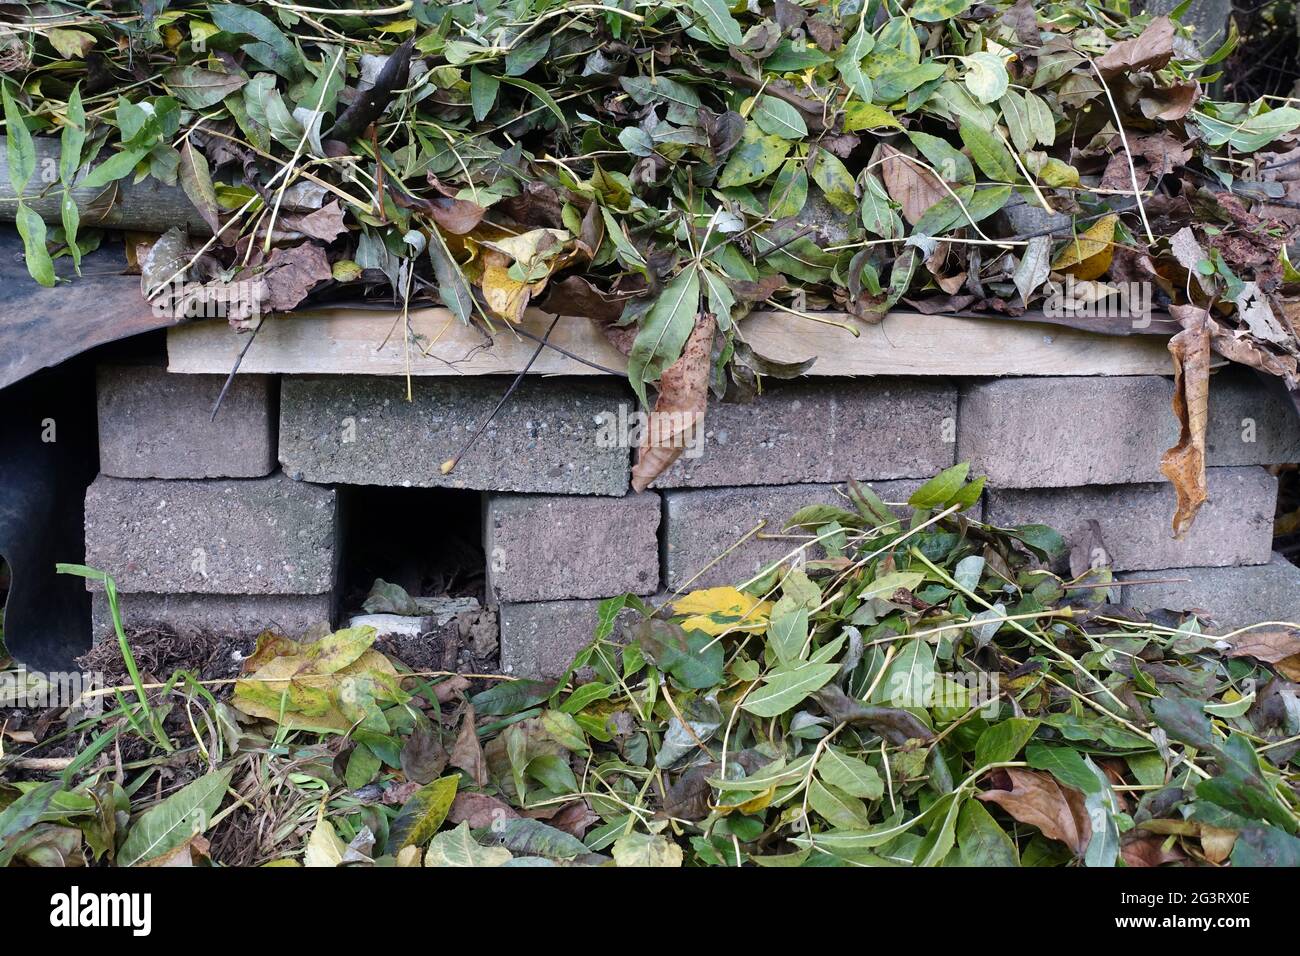 Hedgehog house for the winter with roof made of wooden boards and waterproof pond liner, with autumn Stock Photo